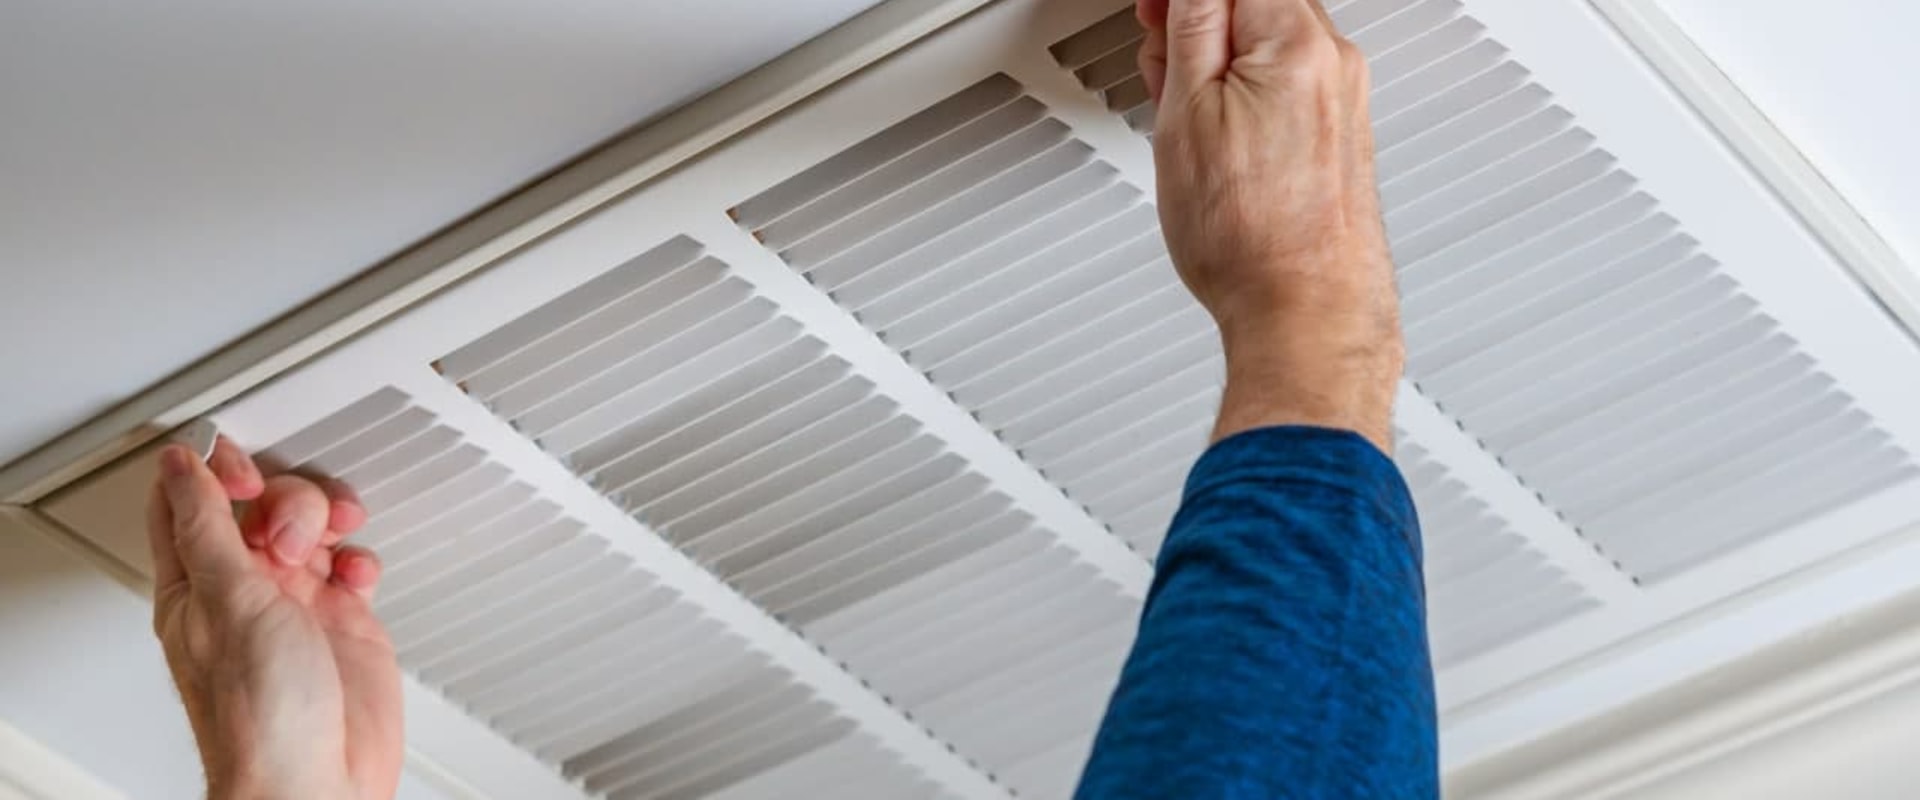 Should I Use a 1 or 2 Inch Air Filter?